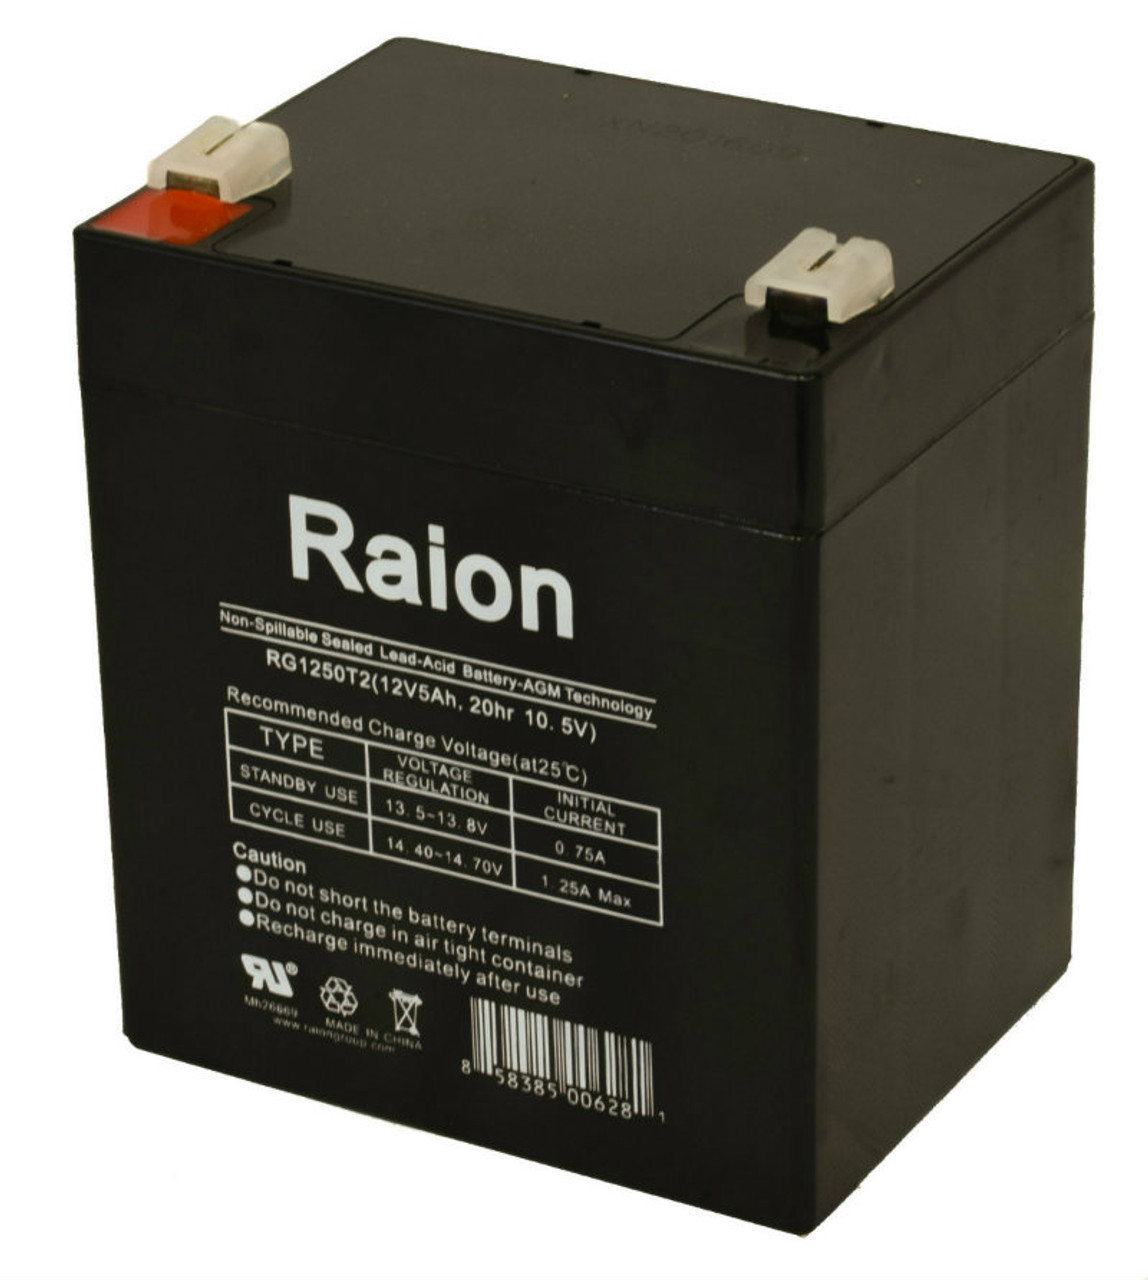 Raion Power RG1250T1 Replacement Emergency Light Battery for Powersonic PS-1242